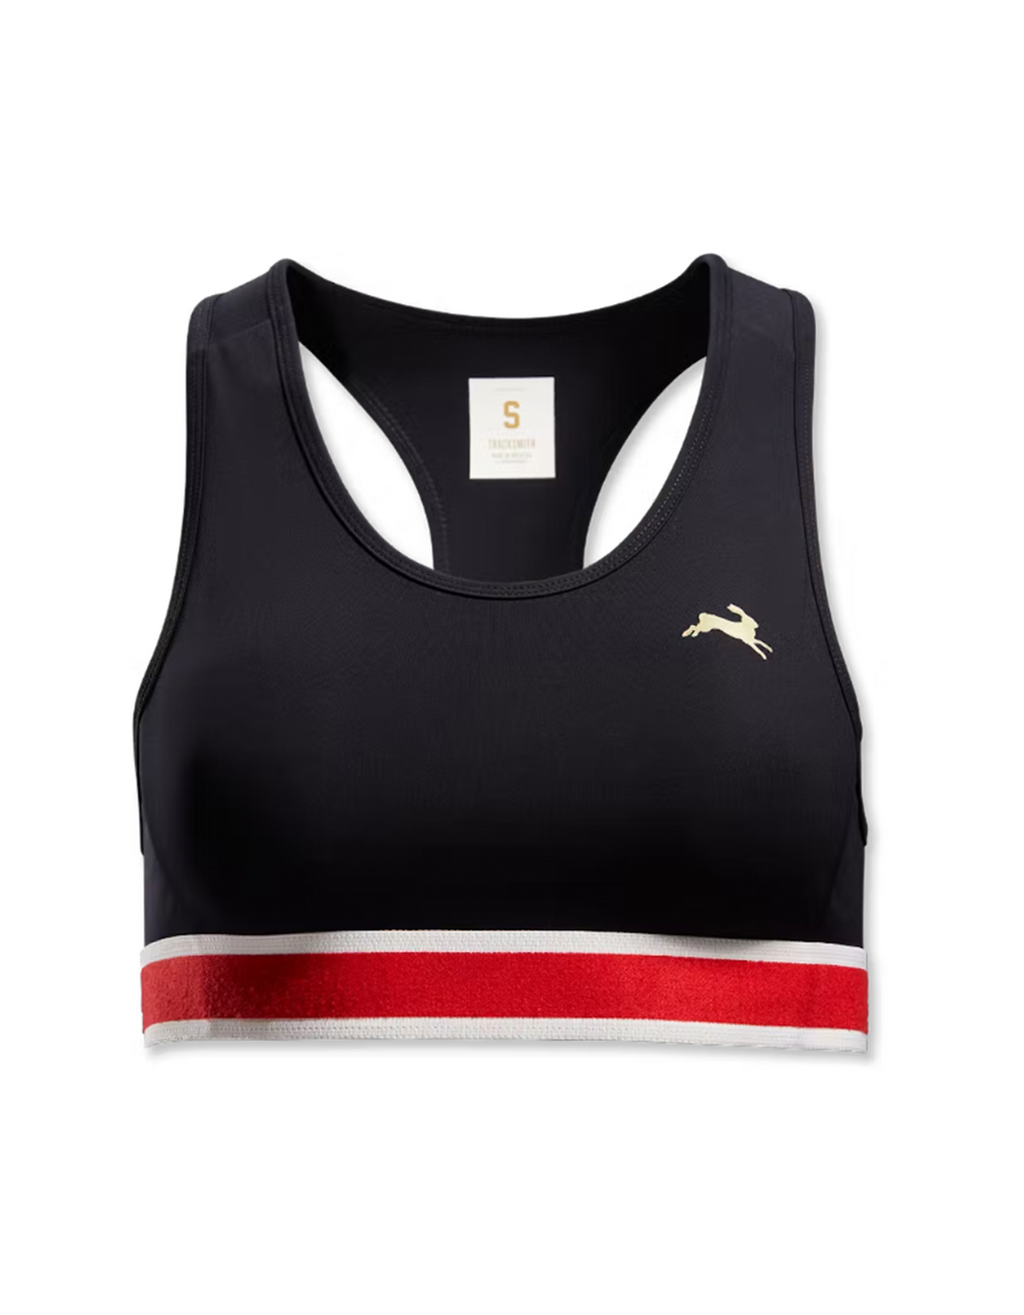 Tracksmith: The New Bell Lop Top